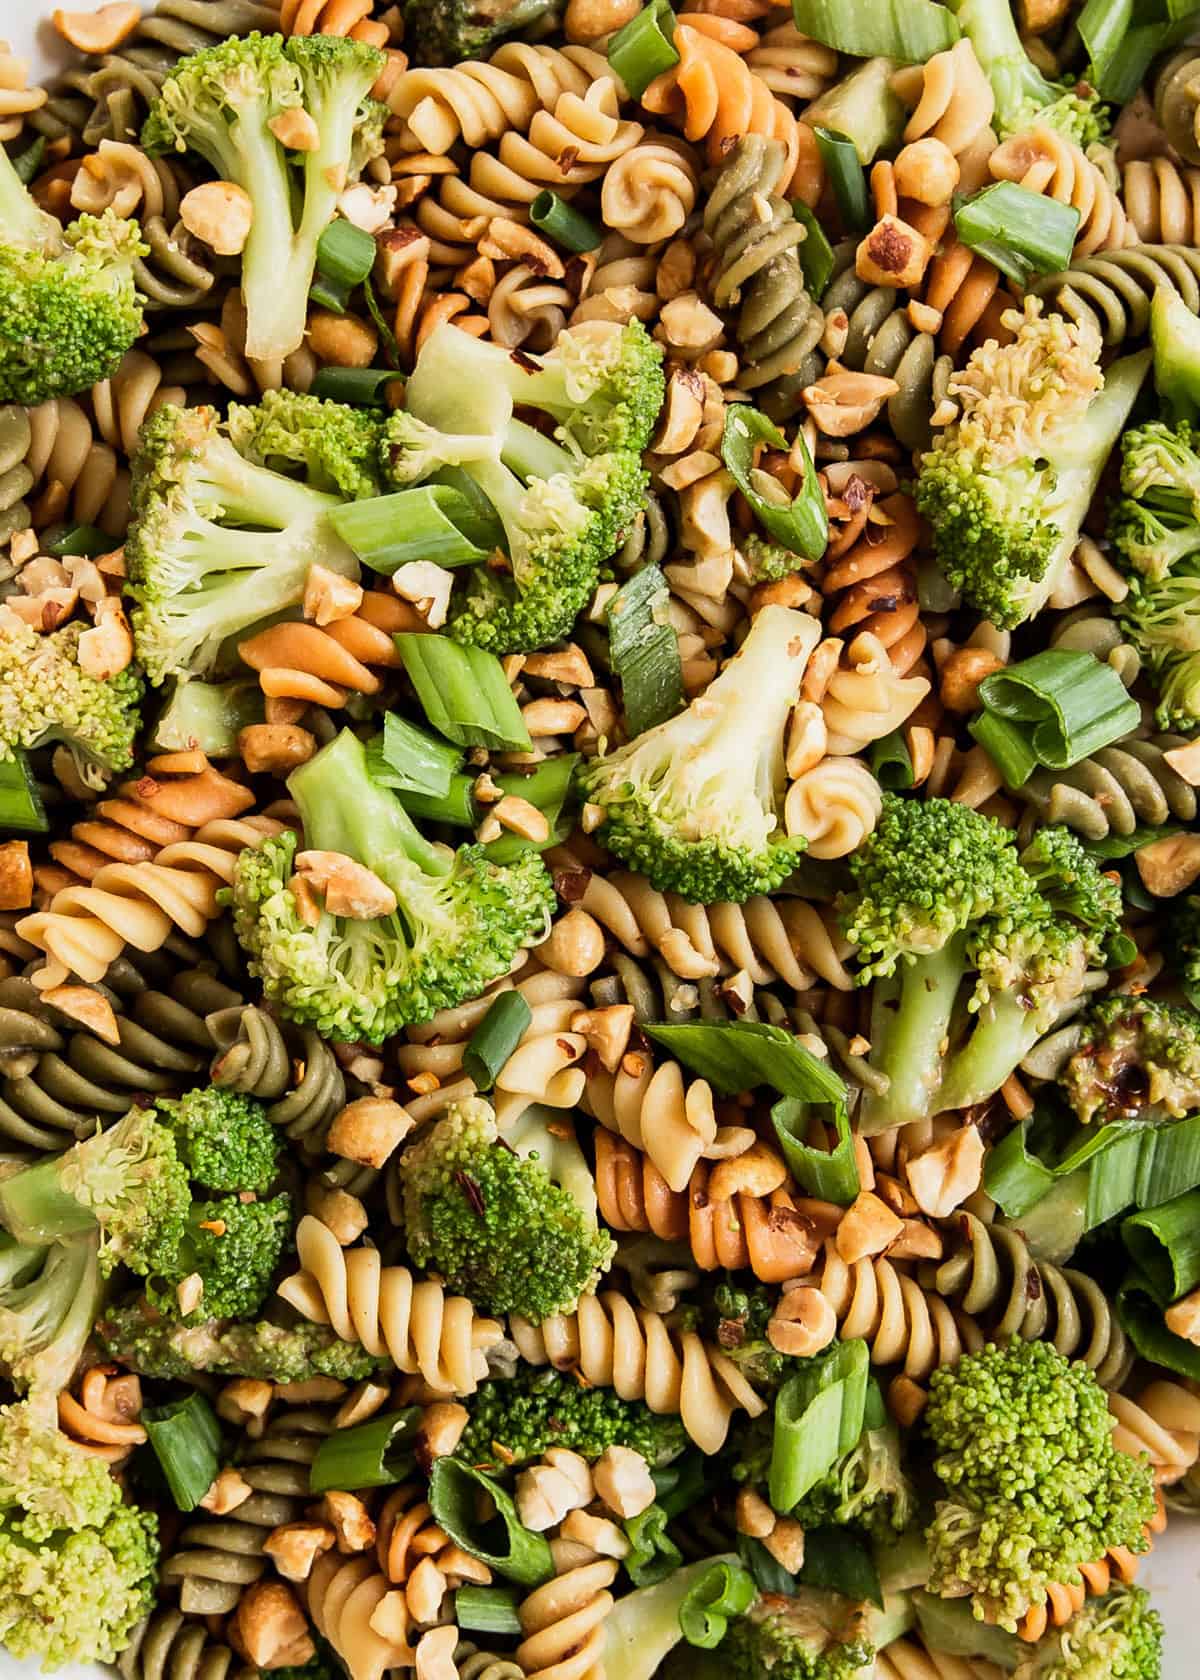 close up of broccoli and pasta salad with peanuts, scallions and red pepper flakes.